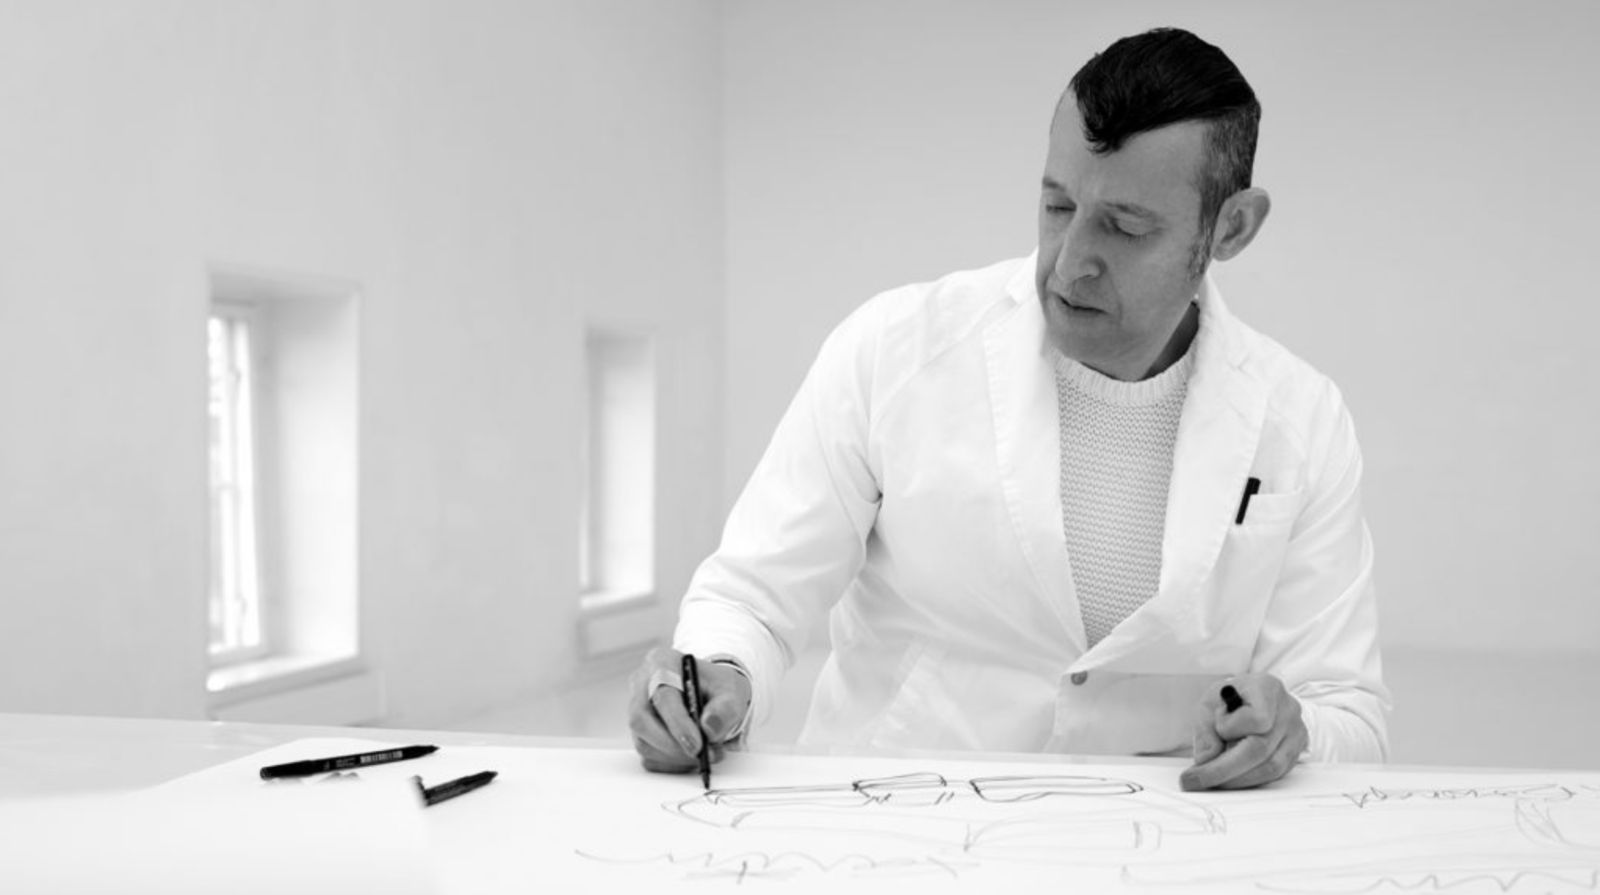 6 Things to Know About American Prize for Design Winner Karim Rashid